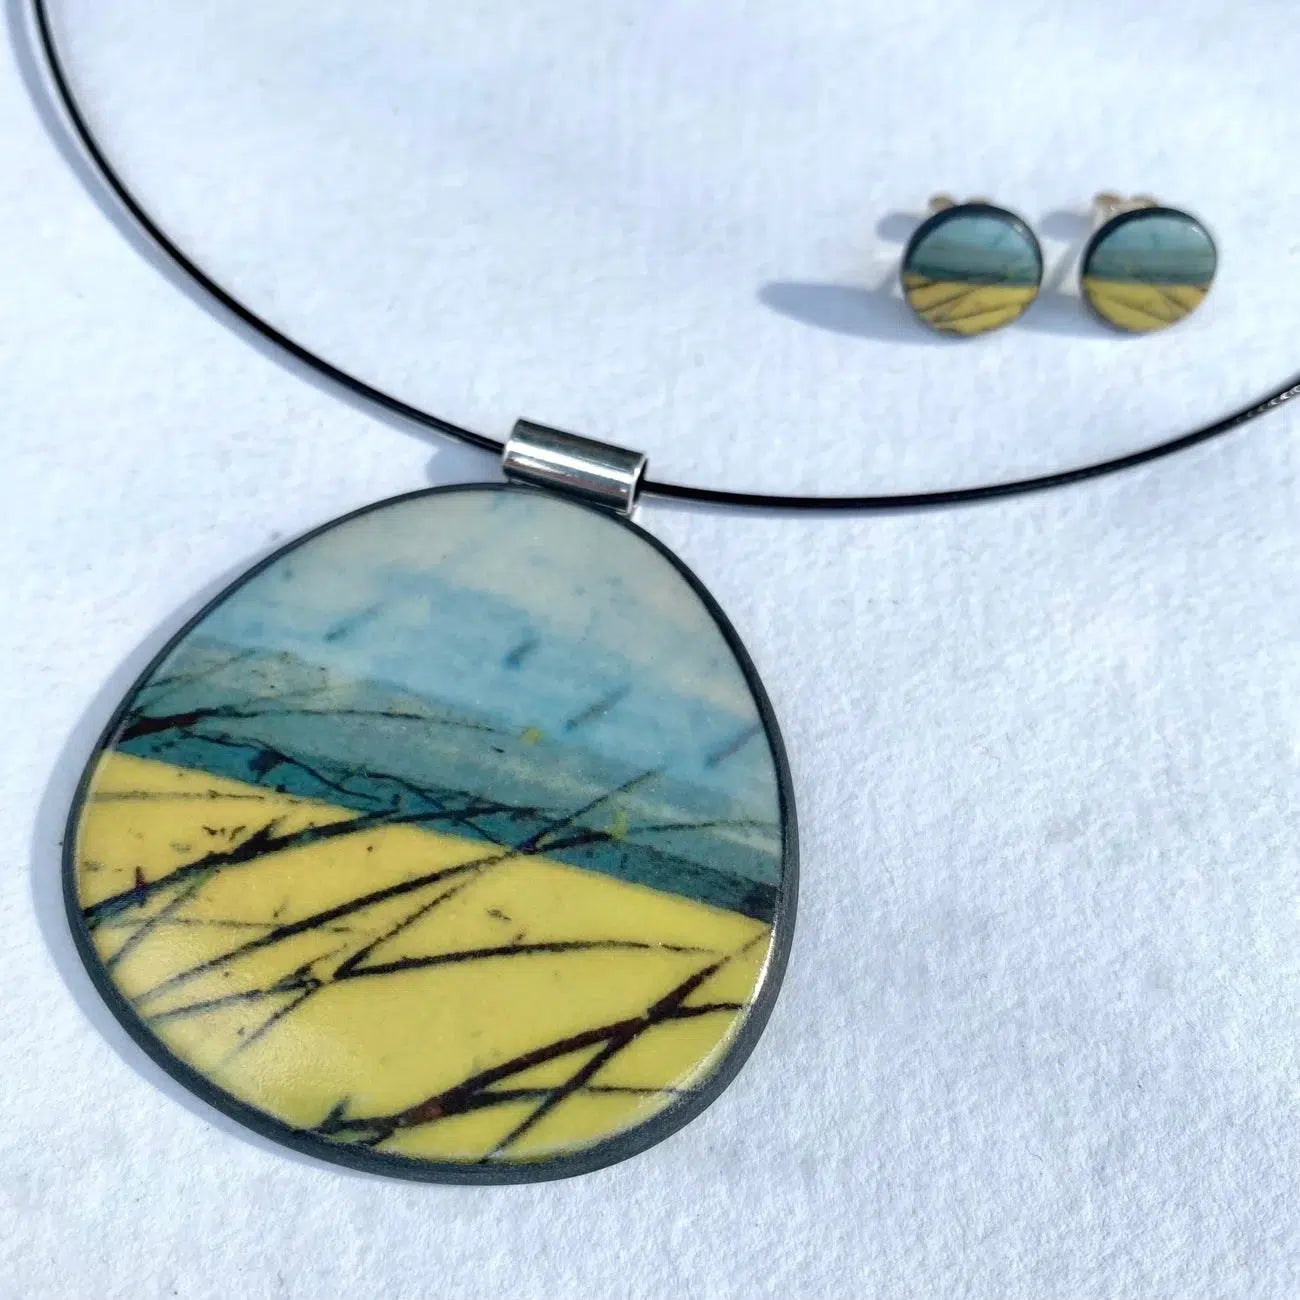 P-SKR Skyline Rounded Pendant by Karen Howarth at Padstow Gallery, Cornwall